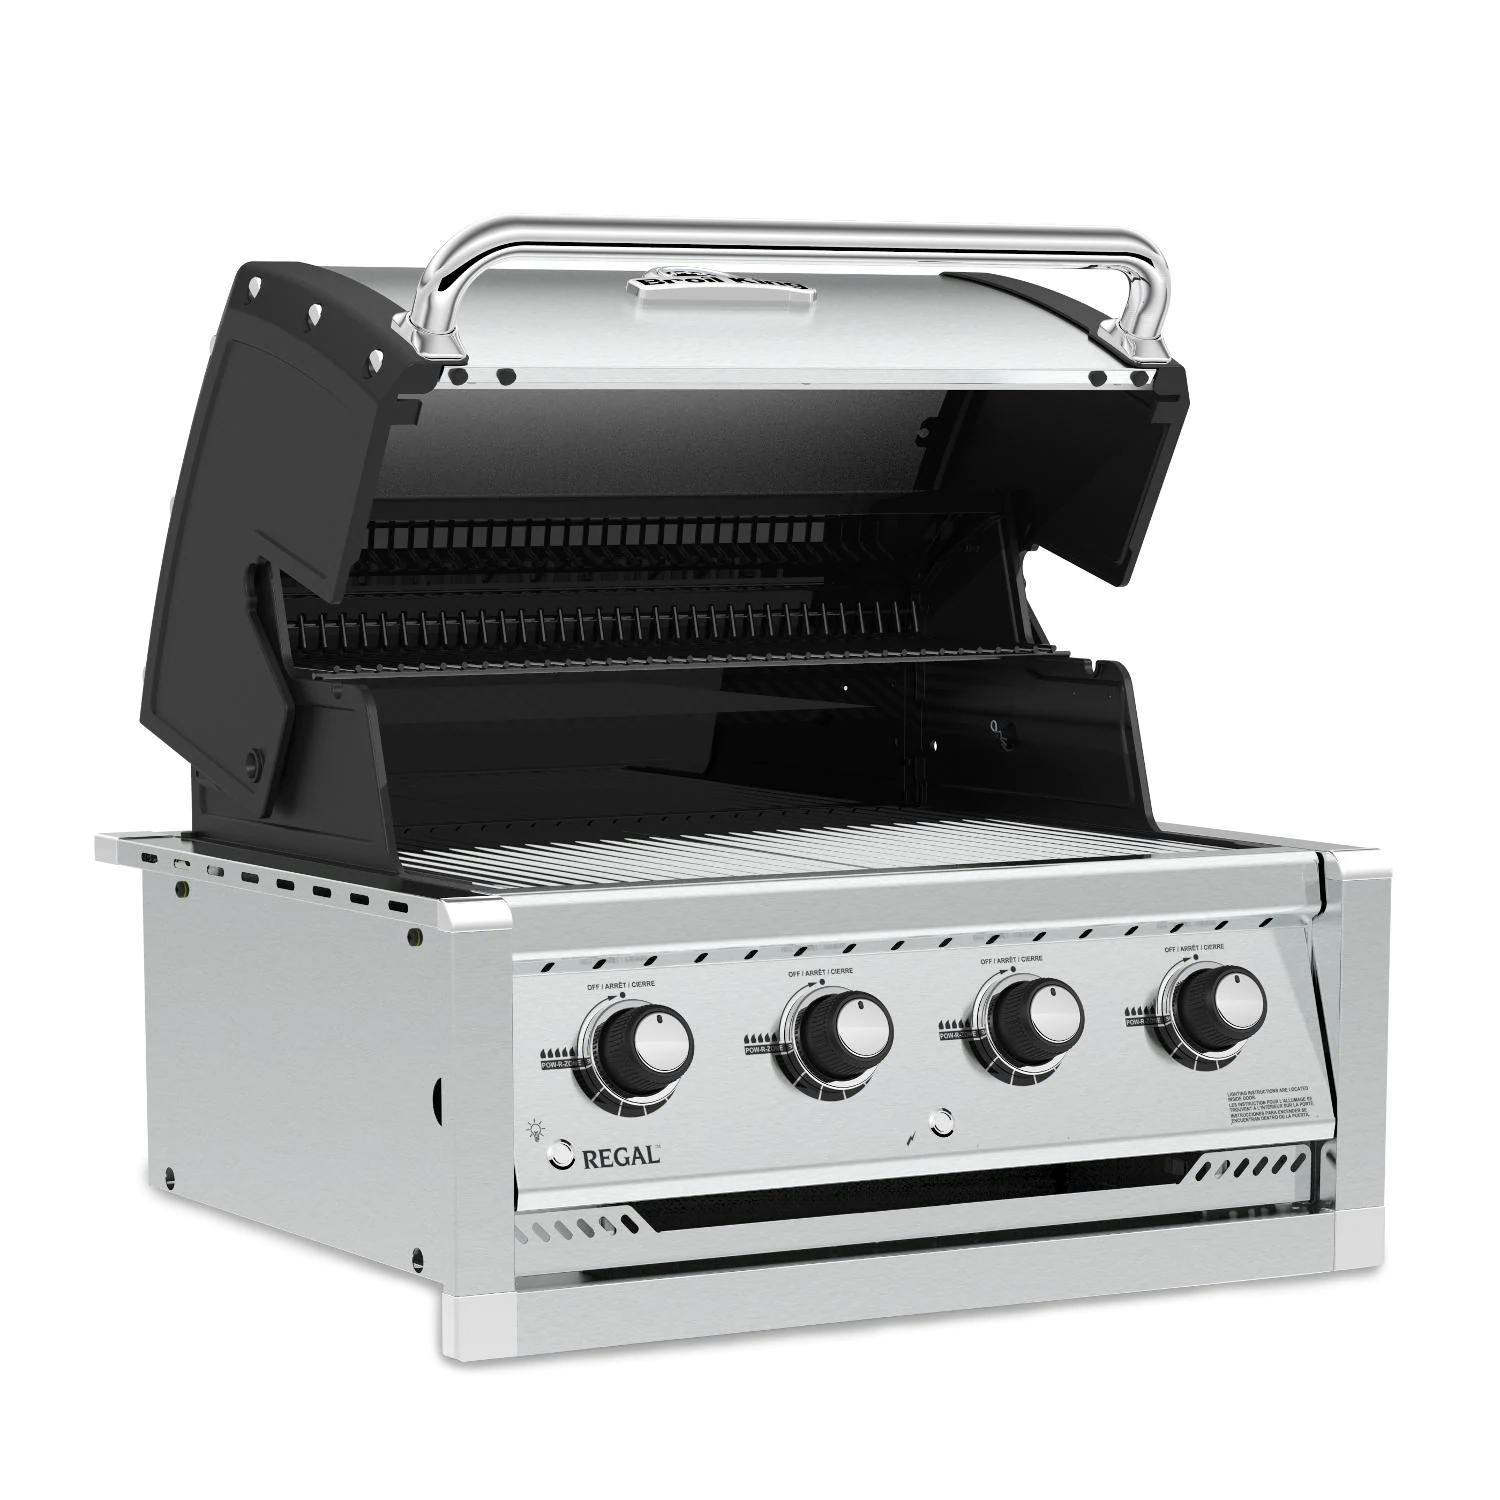 Broil King Regal S420 4-Burner Built-In Gas Grill Stainless Steel · Natural Gas